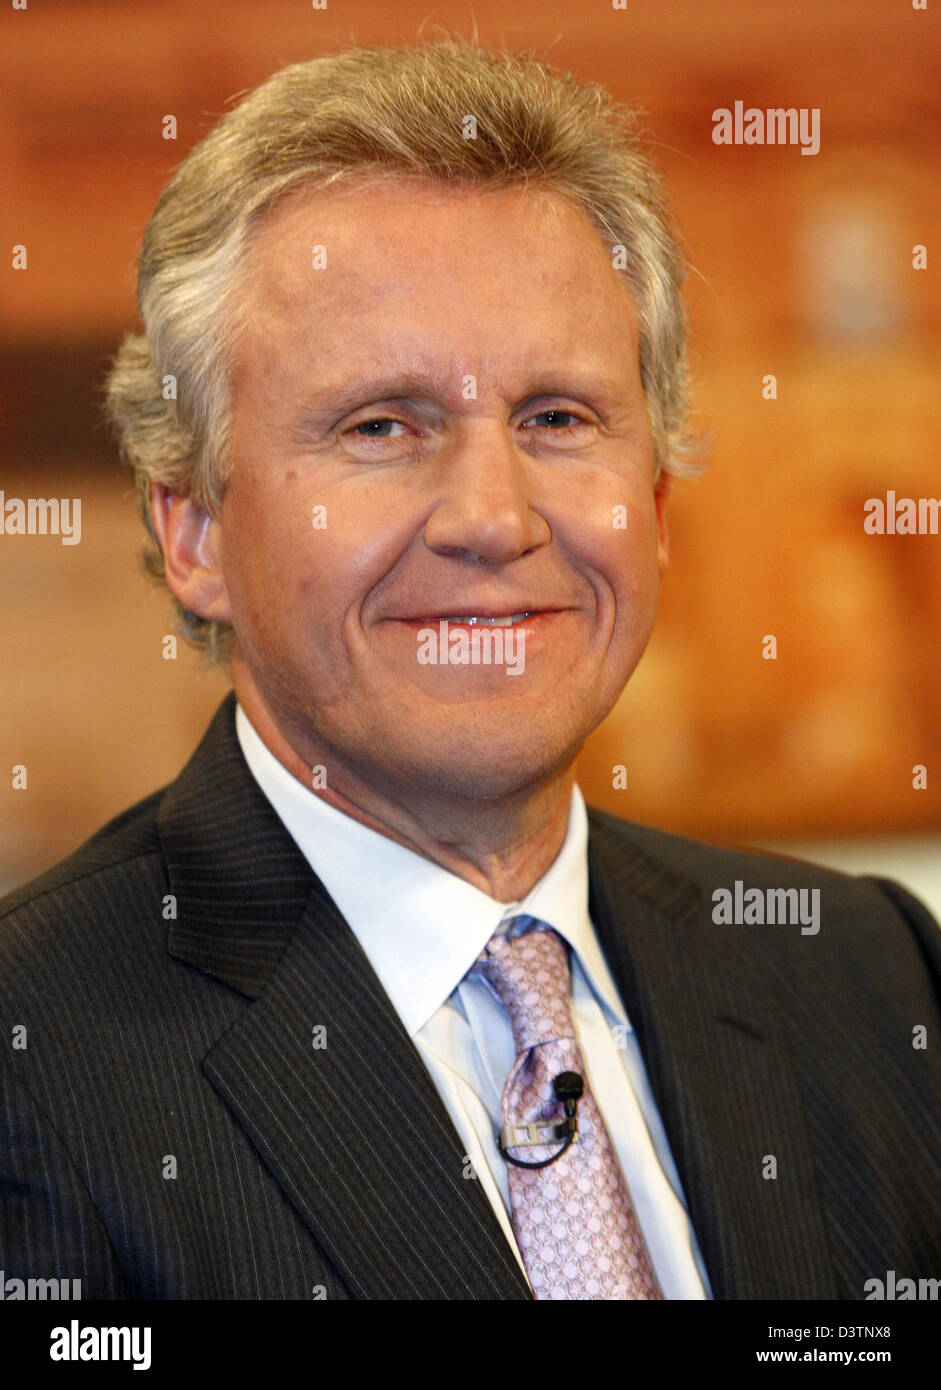 The photo shows the CEO of General Electric, Jeffrey R. Immelt, as guest in the TV programme 'Sabine Christiansen' in Berlin, Germany, Sunday, 22 October 2006. Guests from economy and politics discussed on the issue of 'Wie sozial ist die globale Wirtschaft?' ('How social is global economy?'). Photo: Marcel Mettelsiefen Stock Photo